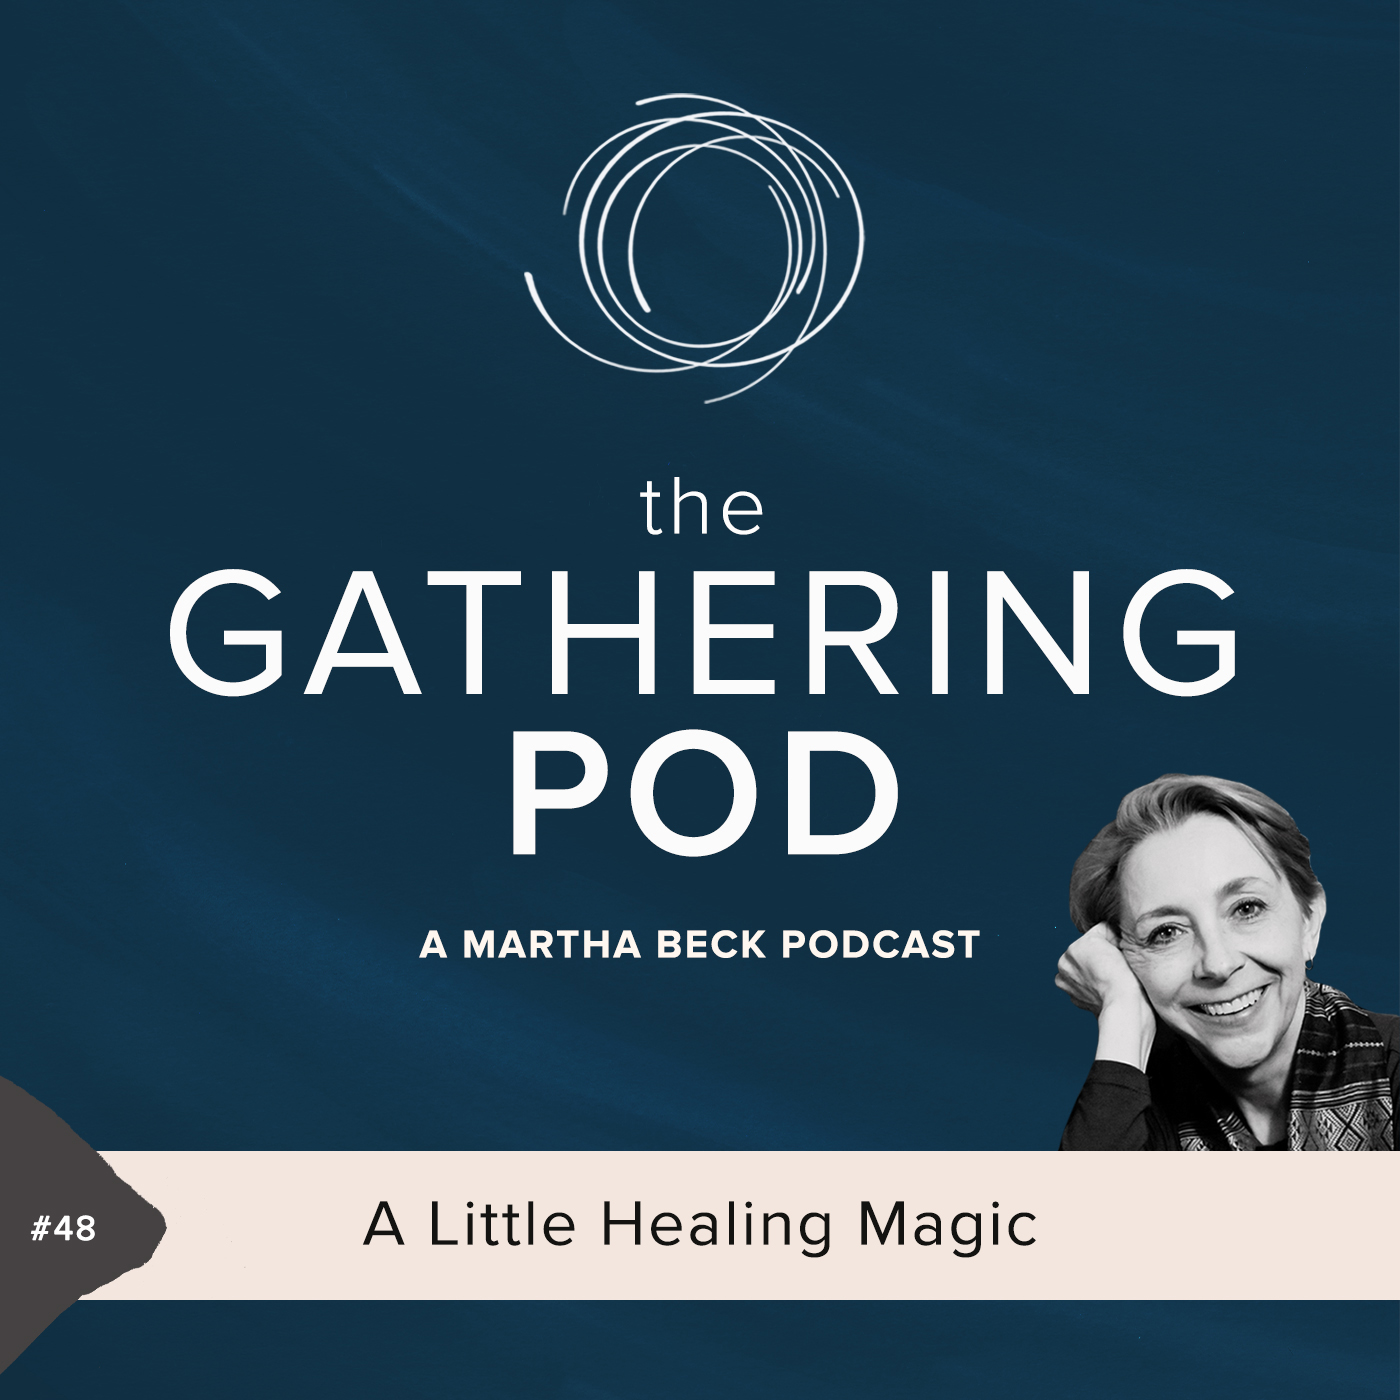 Image for The Gathering Pod A Martha Beck Podcast Episode #48 A Little Healing Magic